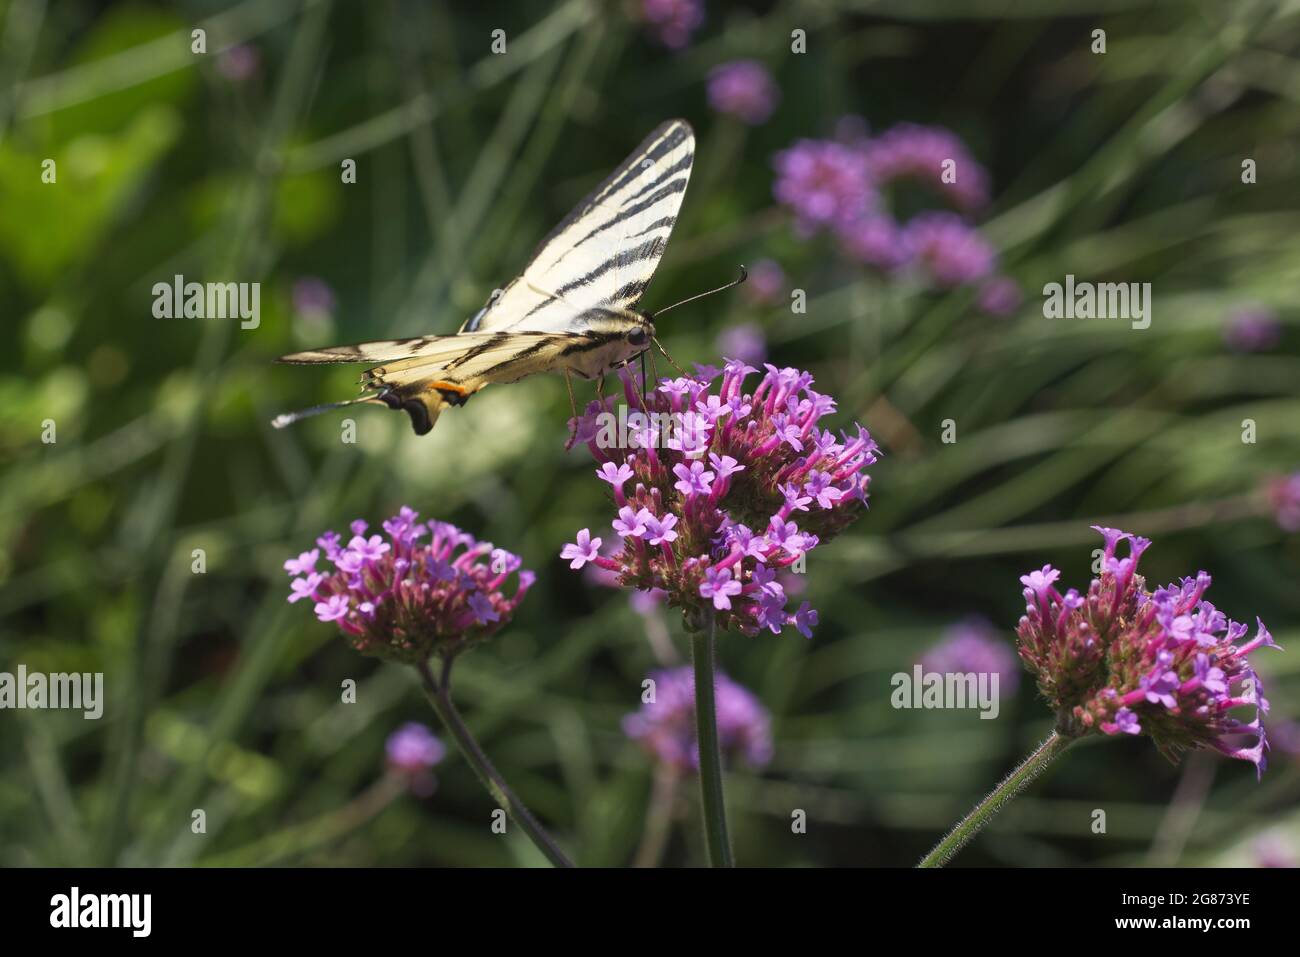 Papilio rutulus, the western tiger swallowtail. Swallowtail butterfly of the Papilionidae family. Butterfly feasting on a purple blossom of milkweeds. Stock Photo